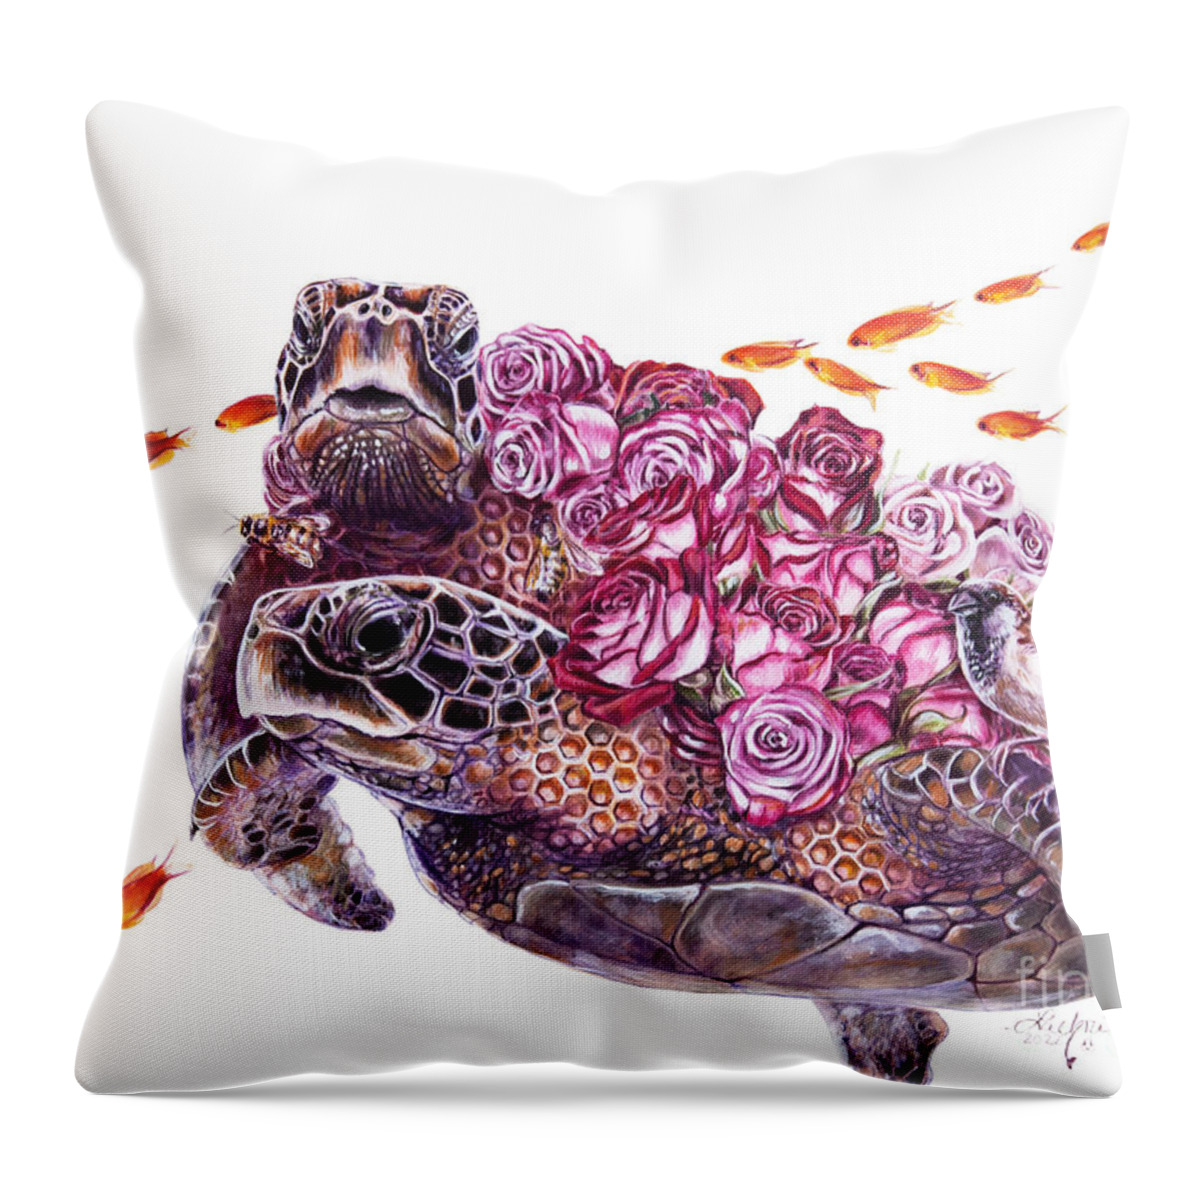 Sea Turtle Throw Pillow featuring the painting Bloom by Lisa Clough Lachri